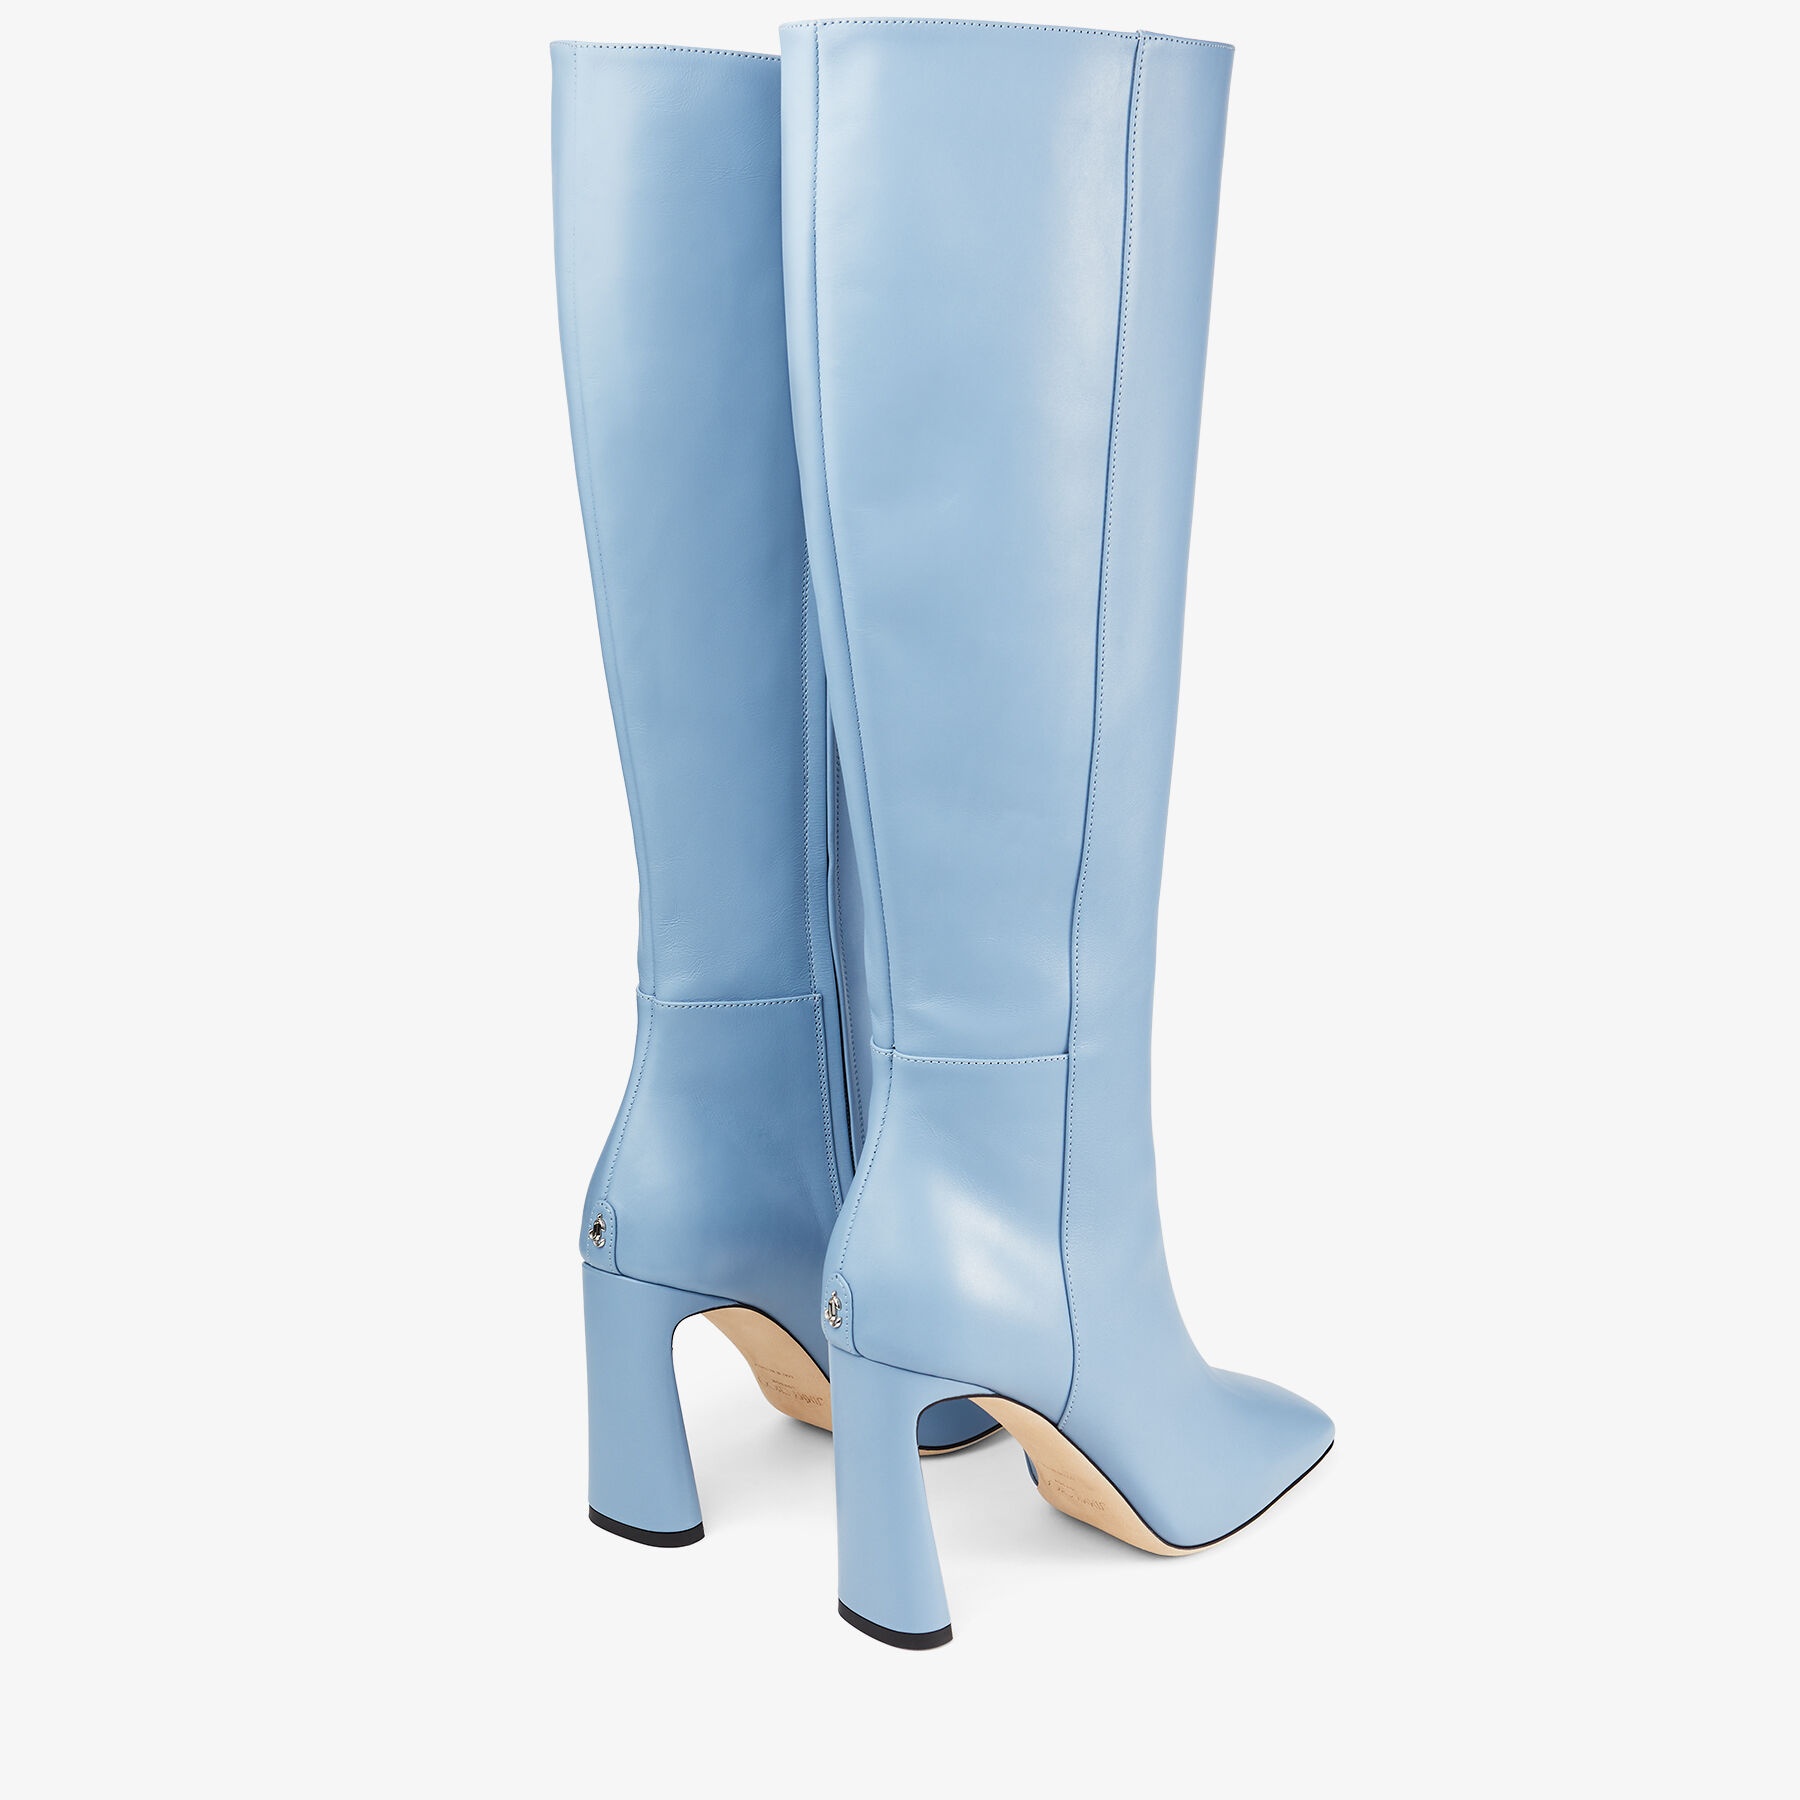 Kinsey 95
Smoky Blue Calf Leather Knee-High Boots - 6